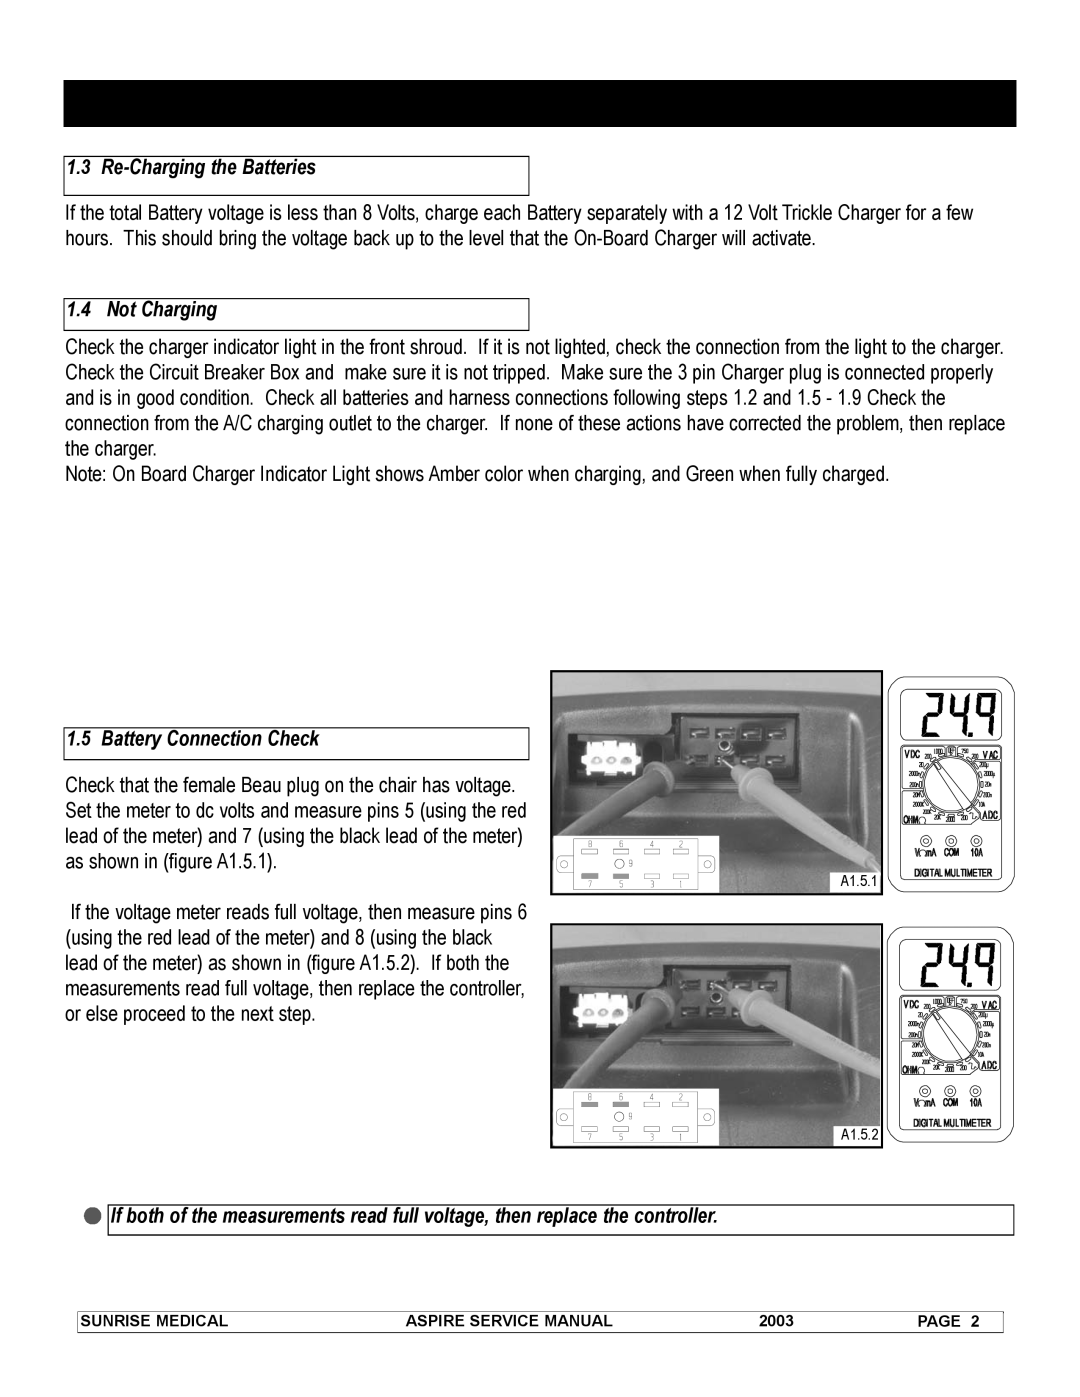 Sunrise Medical 931157 service manual Re-Charging the Batteries, Not Charging, Battery Connection Check, A1.5.1, A1.5.2 